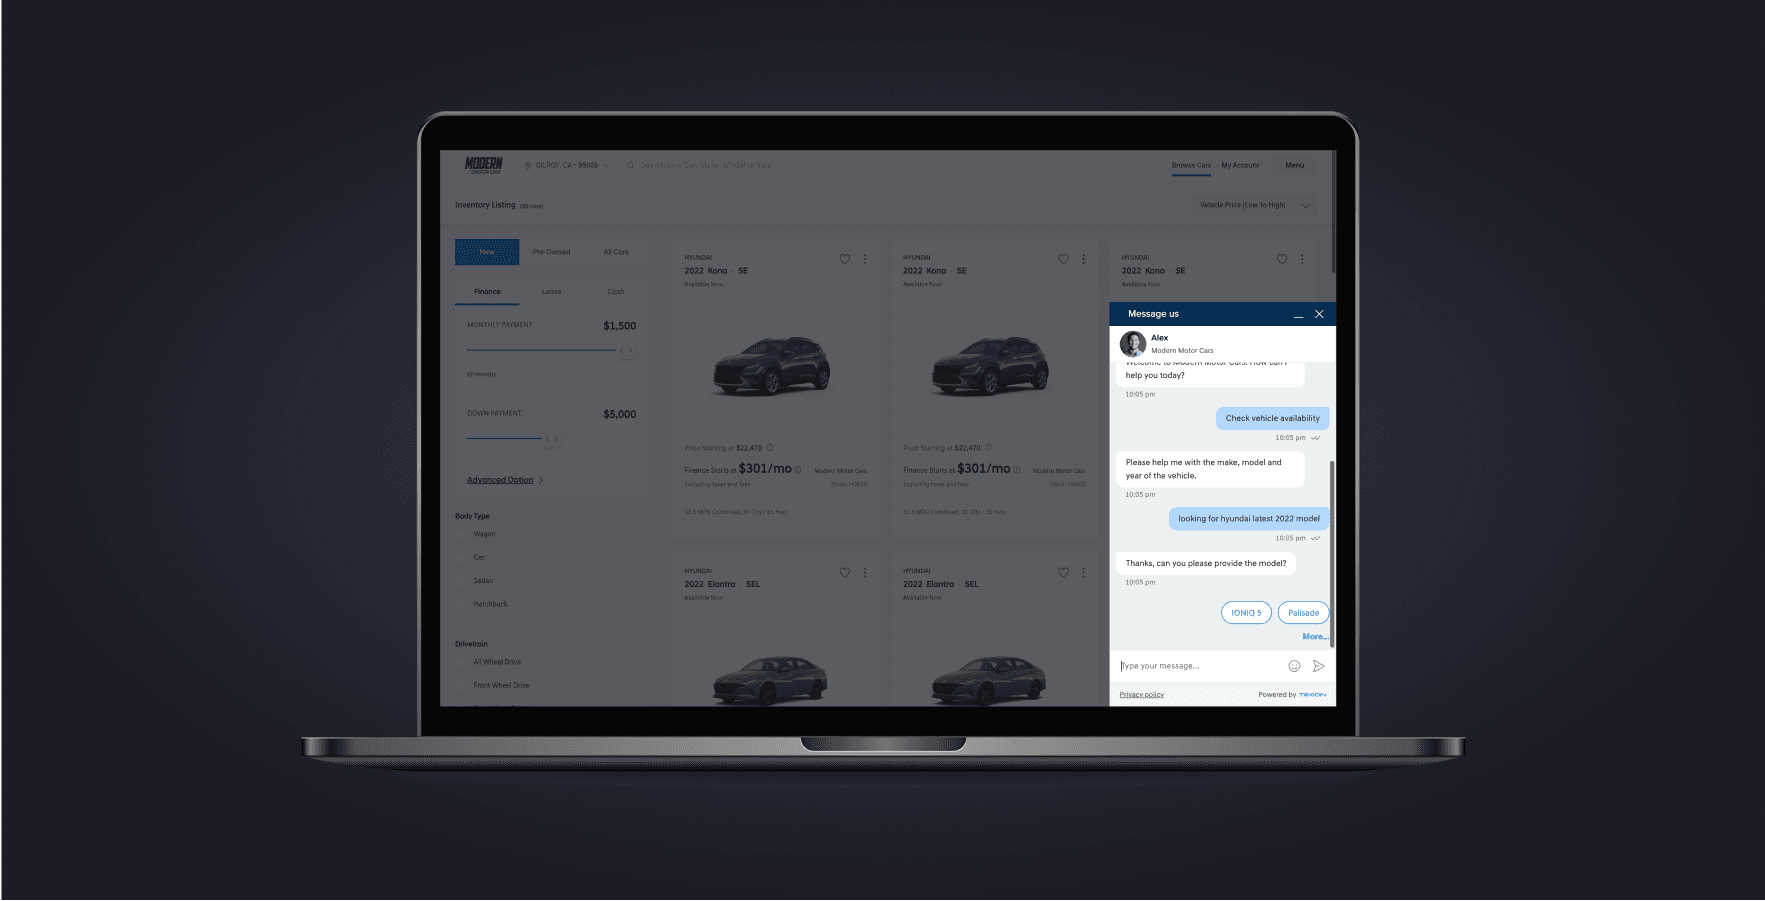 Conversation window displaying a chat between a customer and the chat bot, offering assistance with purchasing a vehicle online